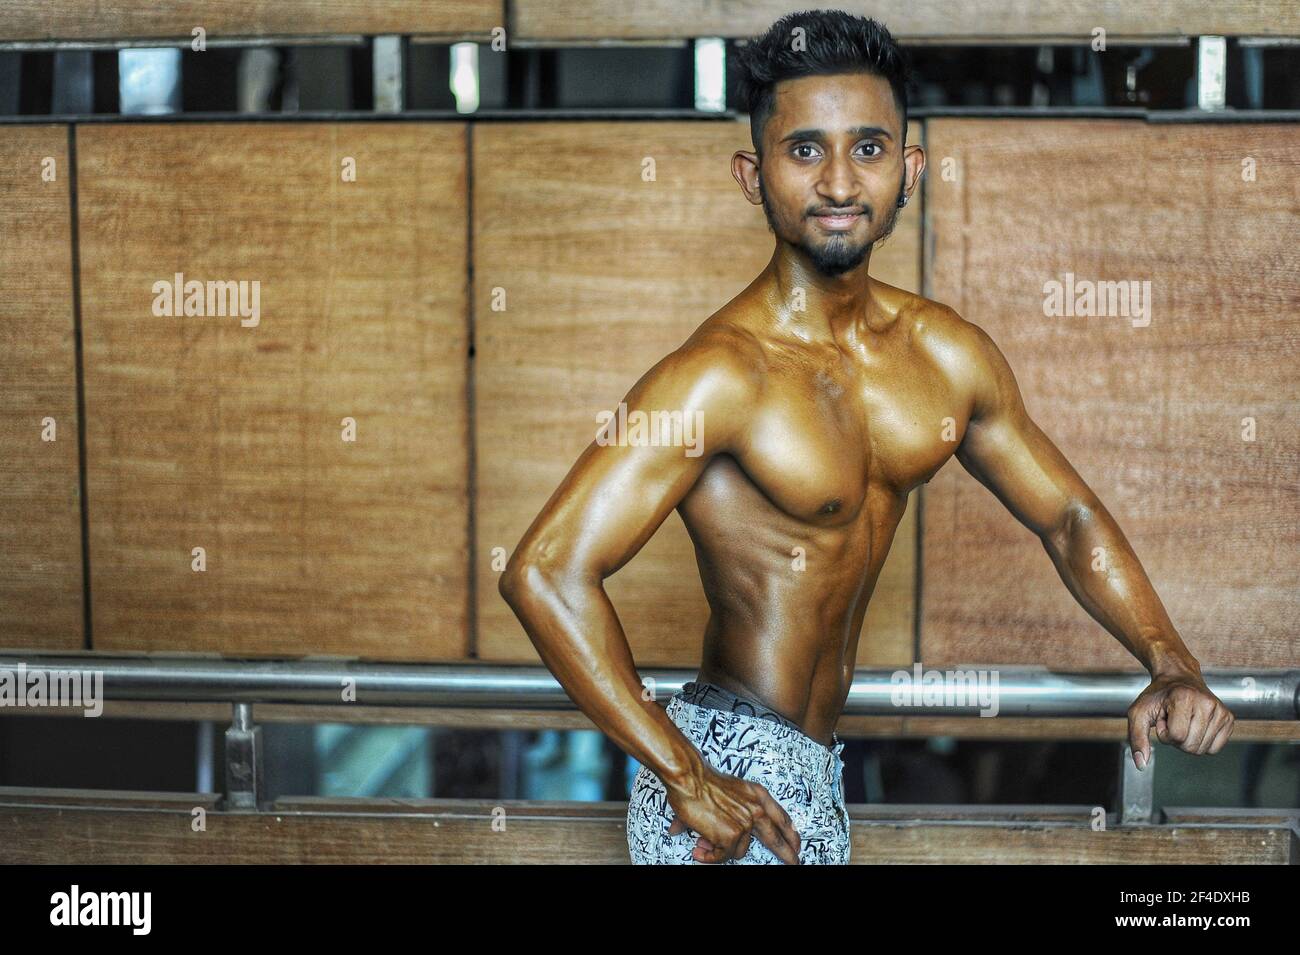 Dhaka, Bangladesh. 20th Mar, 2021. "Mr. Dhaka" open national body building  competition has started in Dhaka today morning. Players from different  parts of the country are taking part in this competition. A